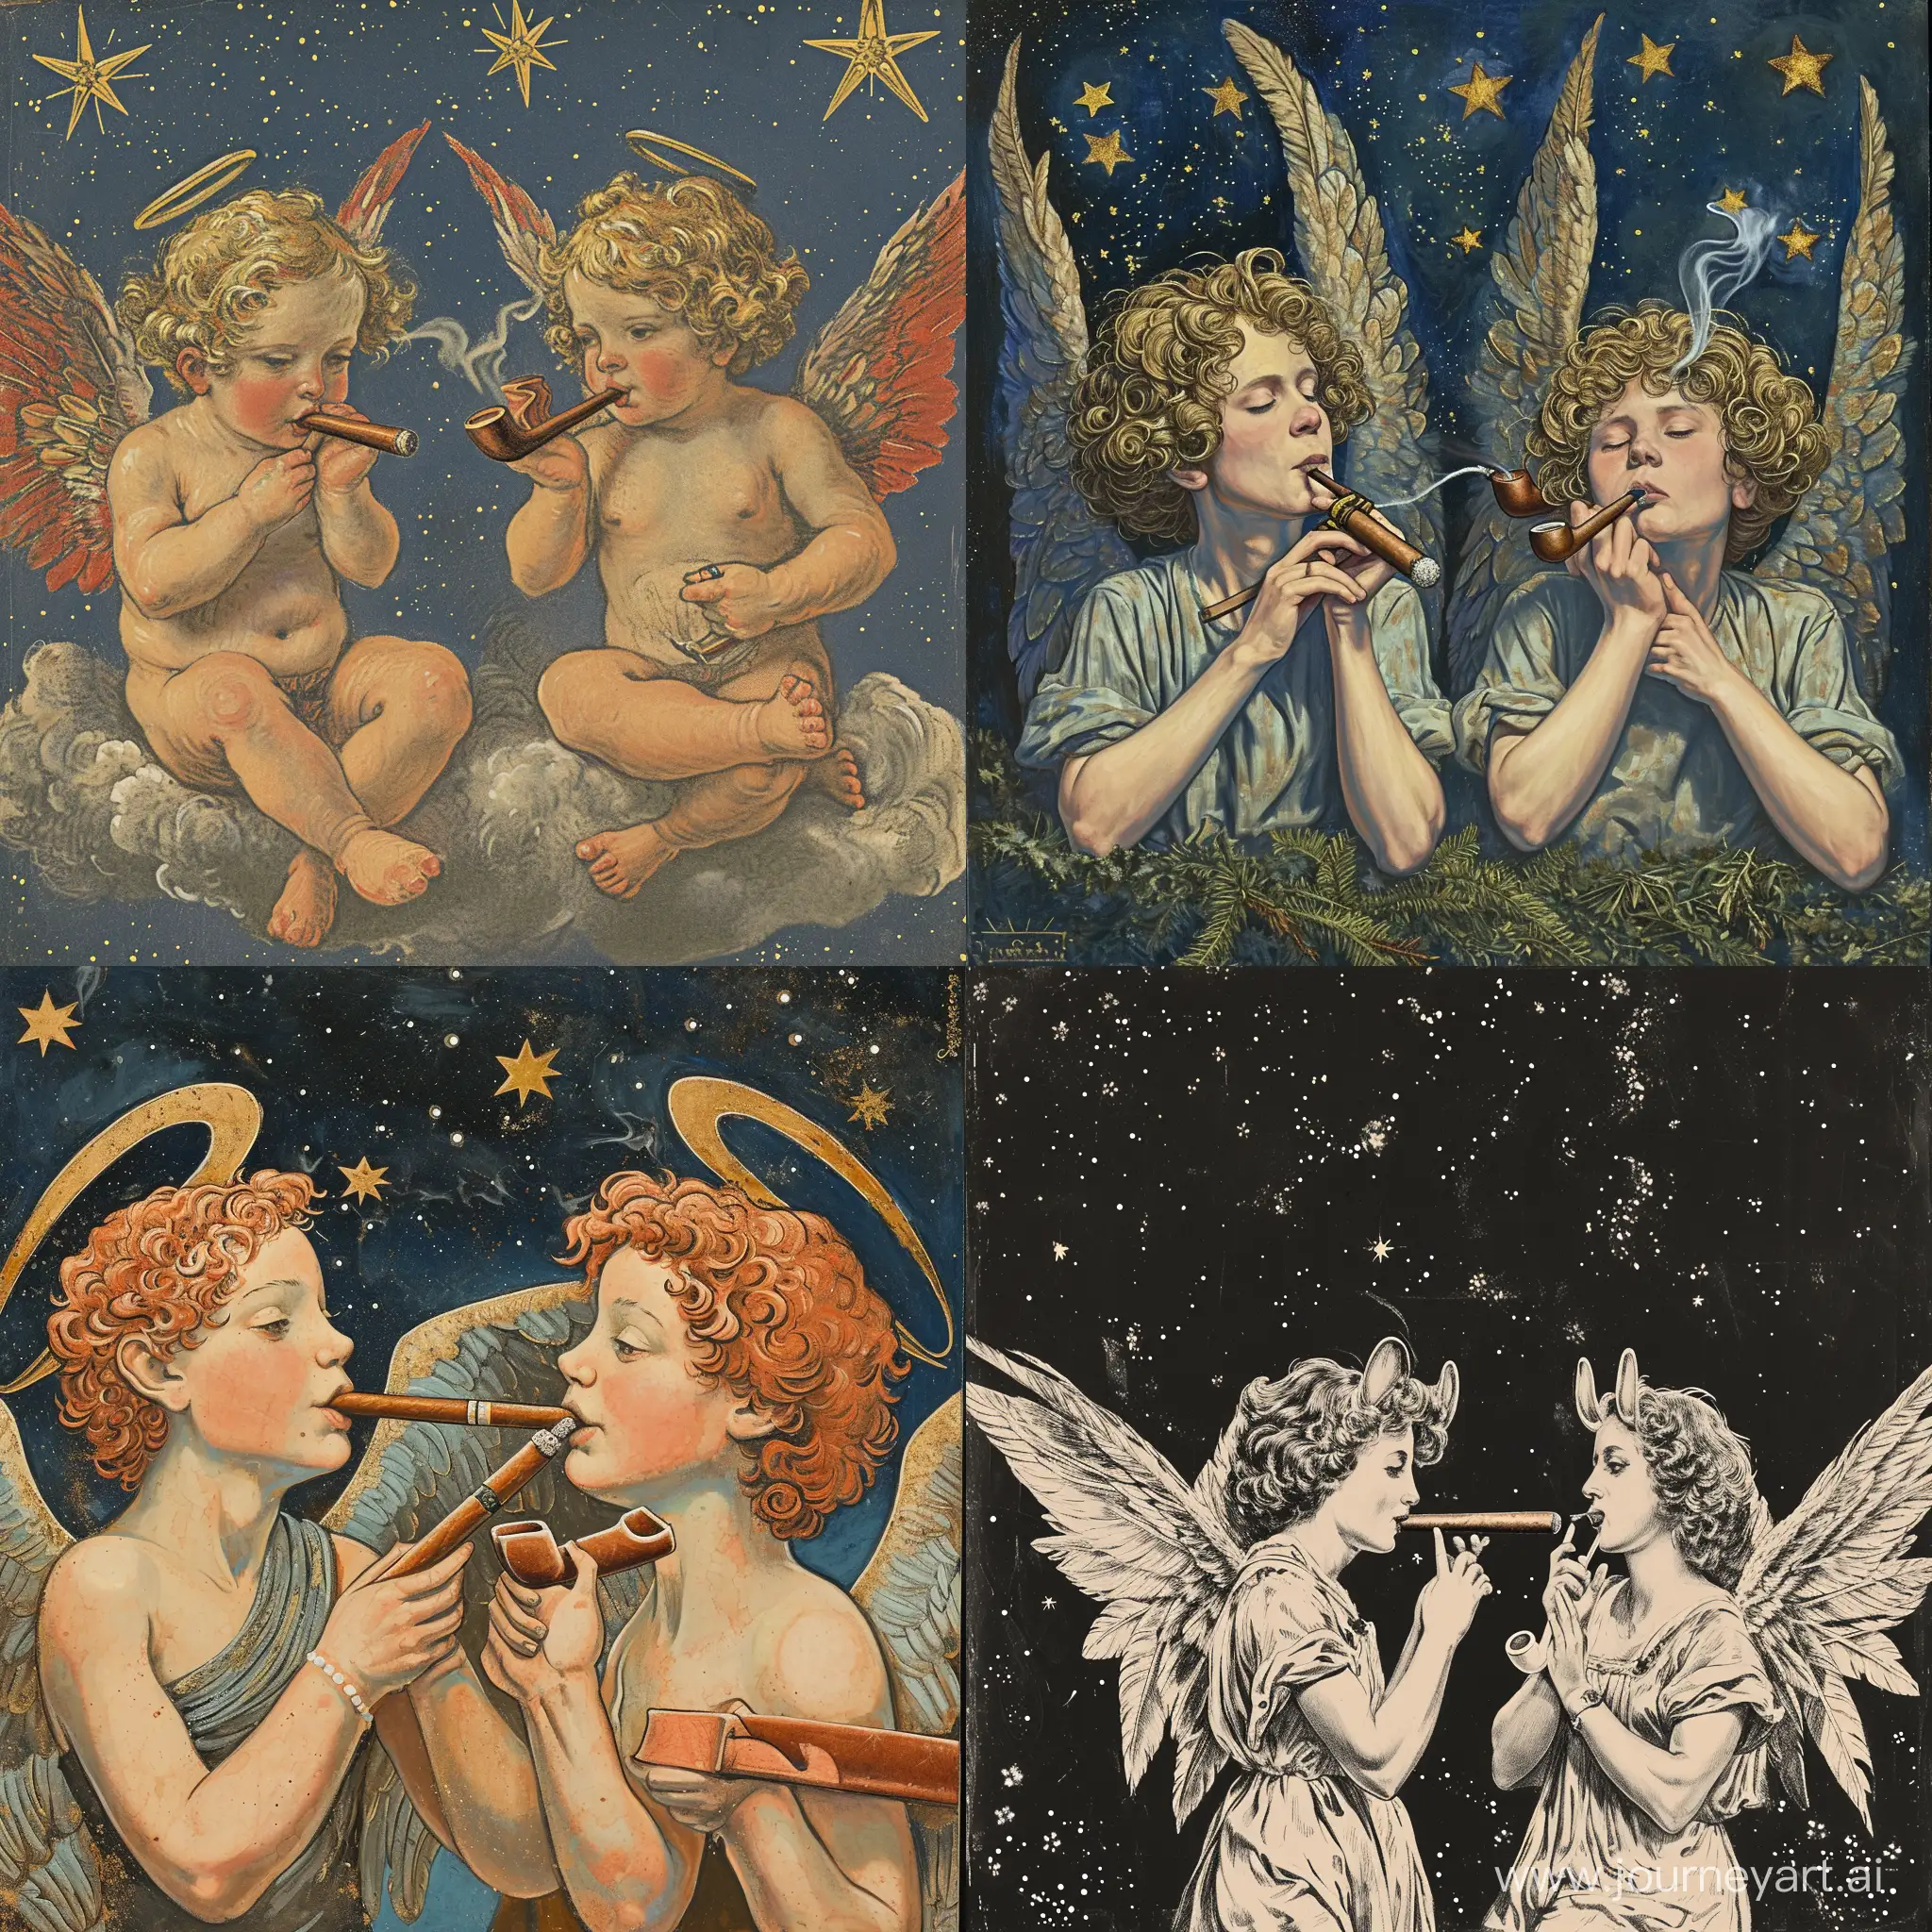 Two angels with six wings, the first angel smokes a cigar, and the second angel smokes a pipe. On fone night starry sky